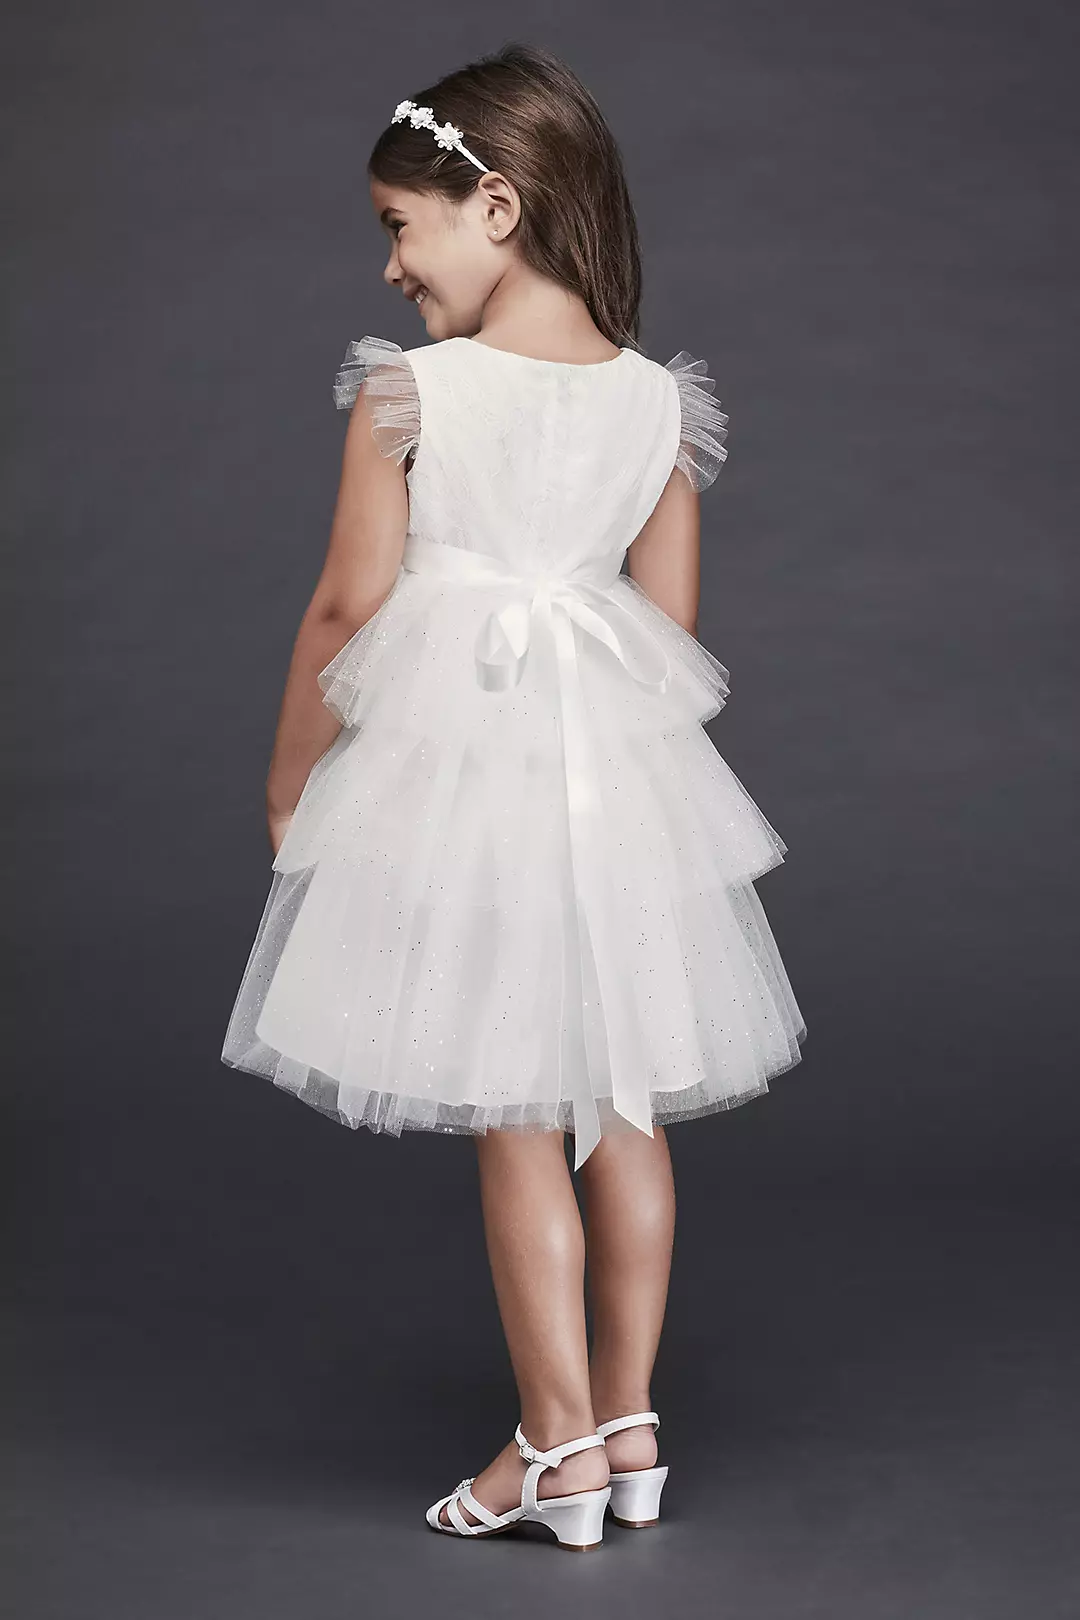 Tiered Sparkle Tulle and Lace Flower Girl Dress Image 2